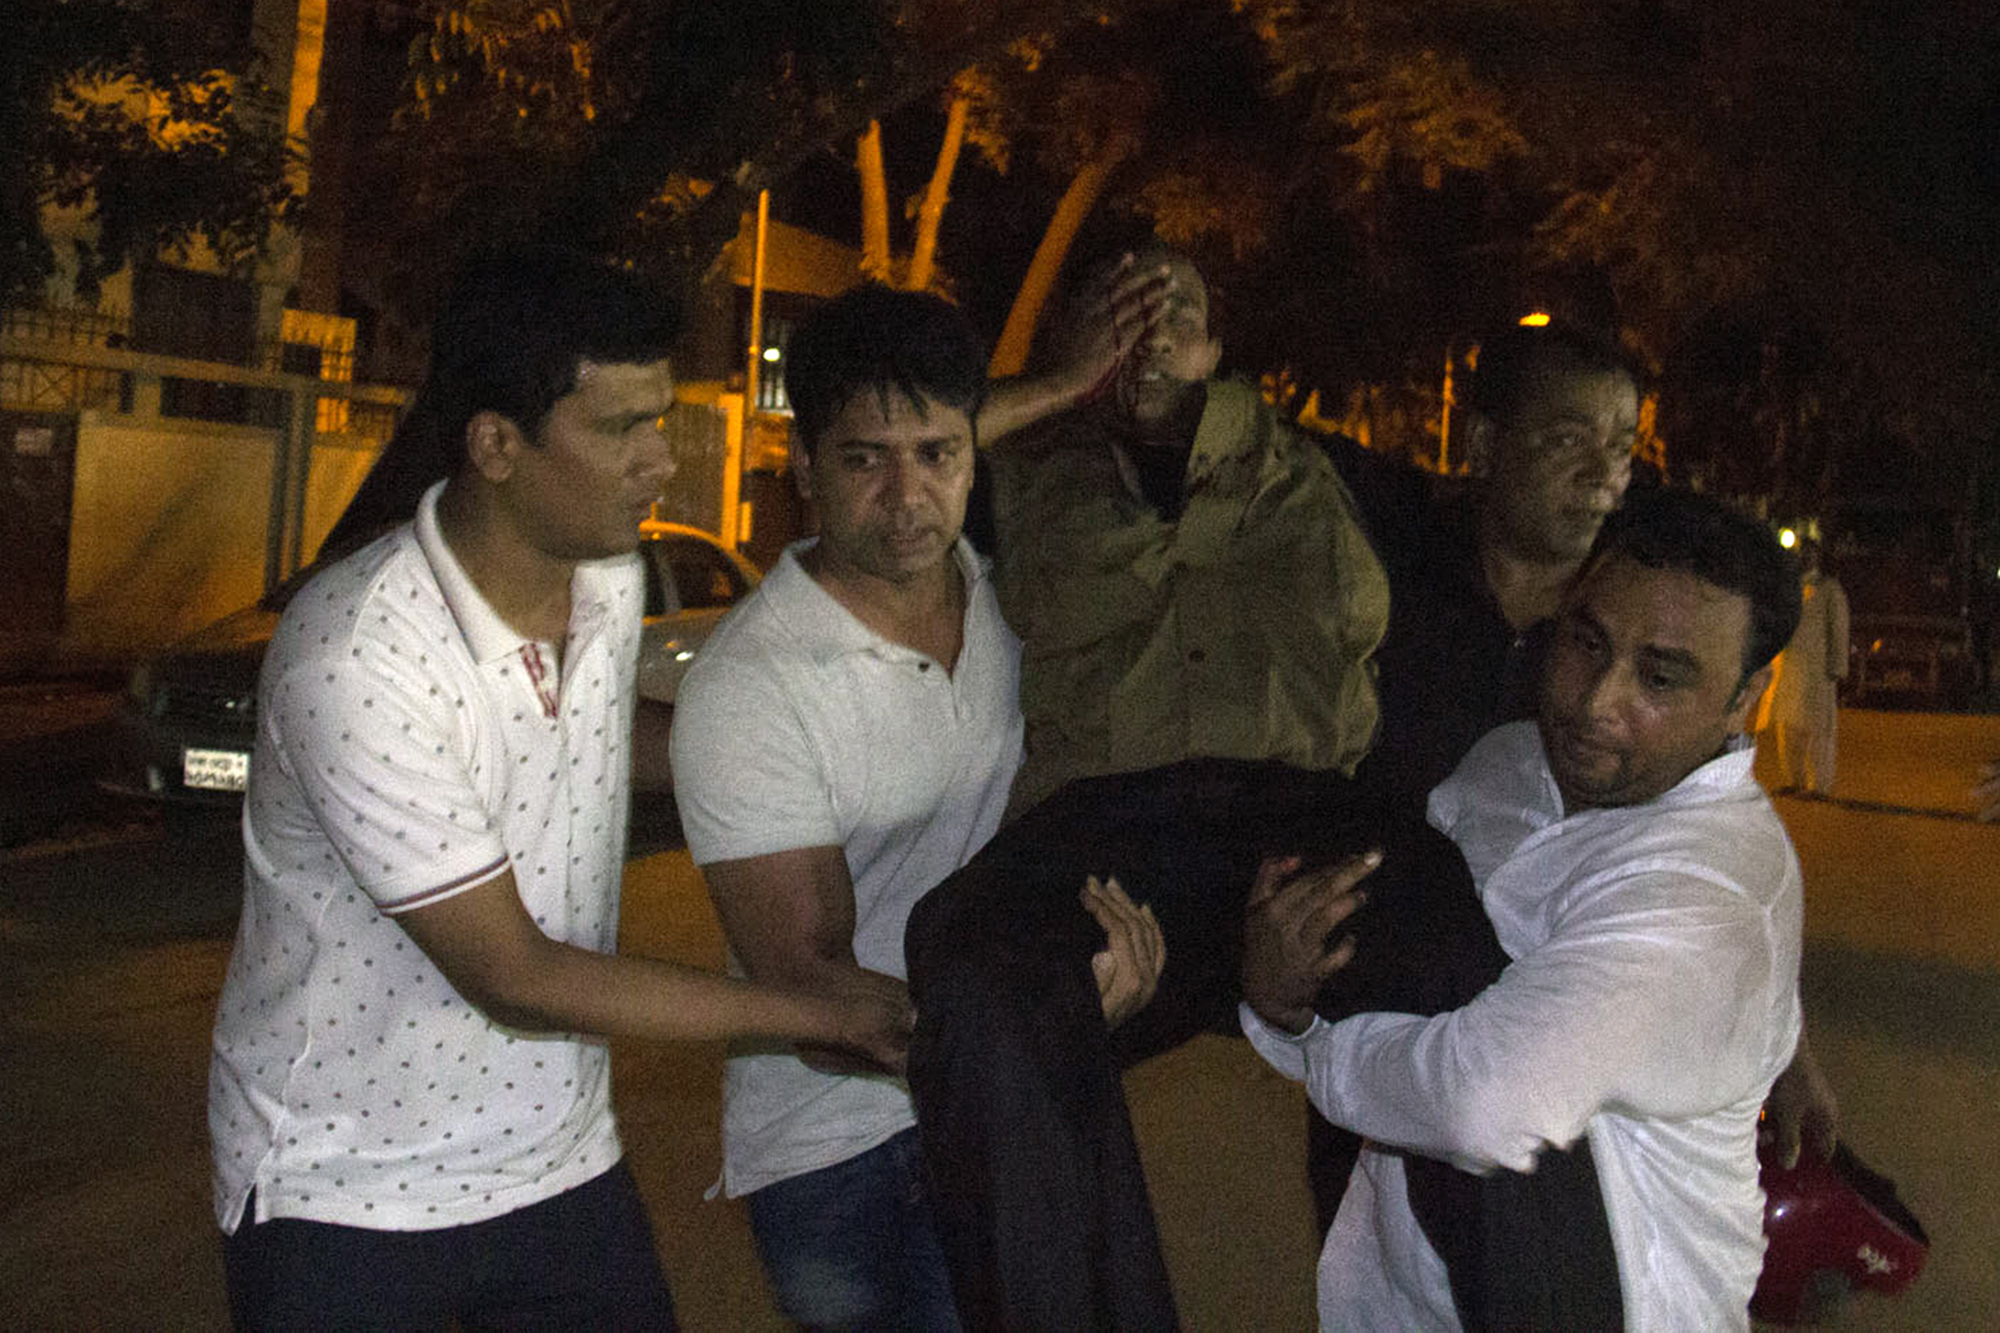 People carry an injured man near the Holey Artisan Bakery restaurant during an attack by unidentified gunmen in Dhaka's high-security diplomatic district on July 2, 2016. Gunmen stormed a crowded restaurant popular with foreigners in the Bangladeshi capital on July 1 night, apparently taking diners hostage and sparking a firefight with police in which at least two officers were killed, police and witnesses said. / AFP PHOTO / STR